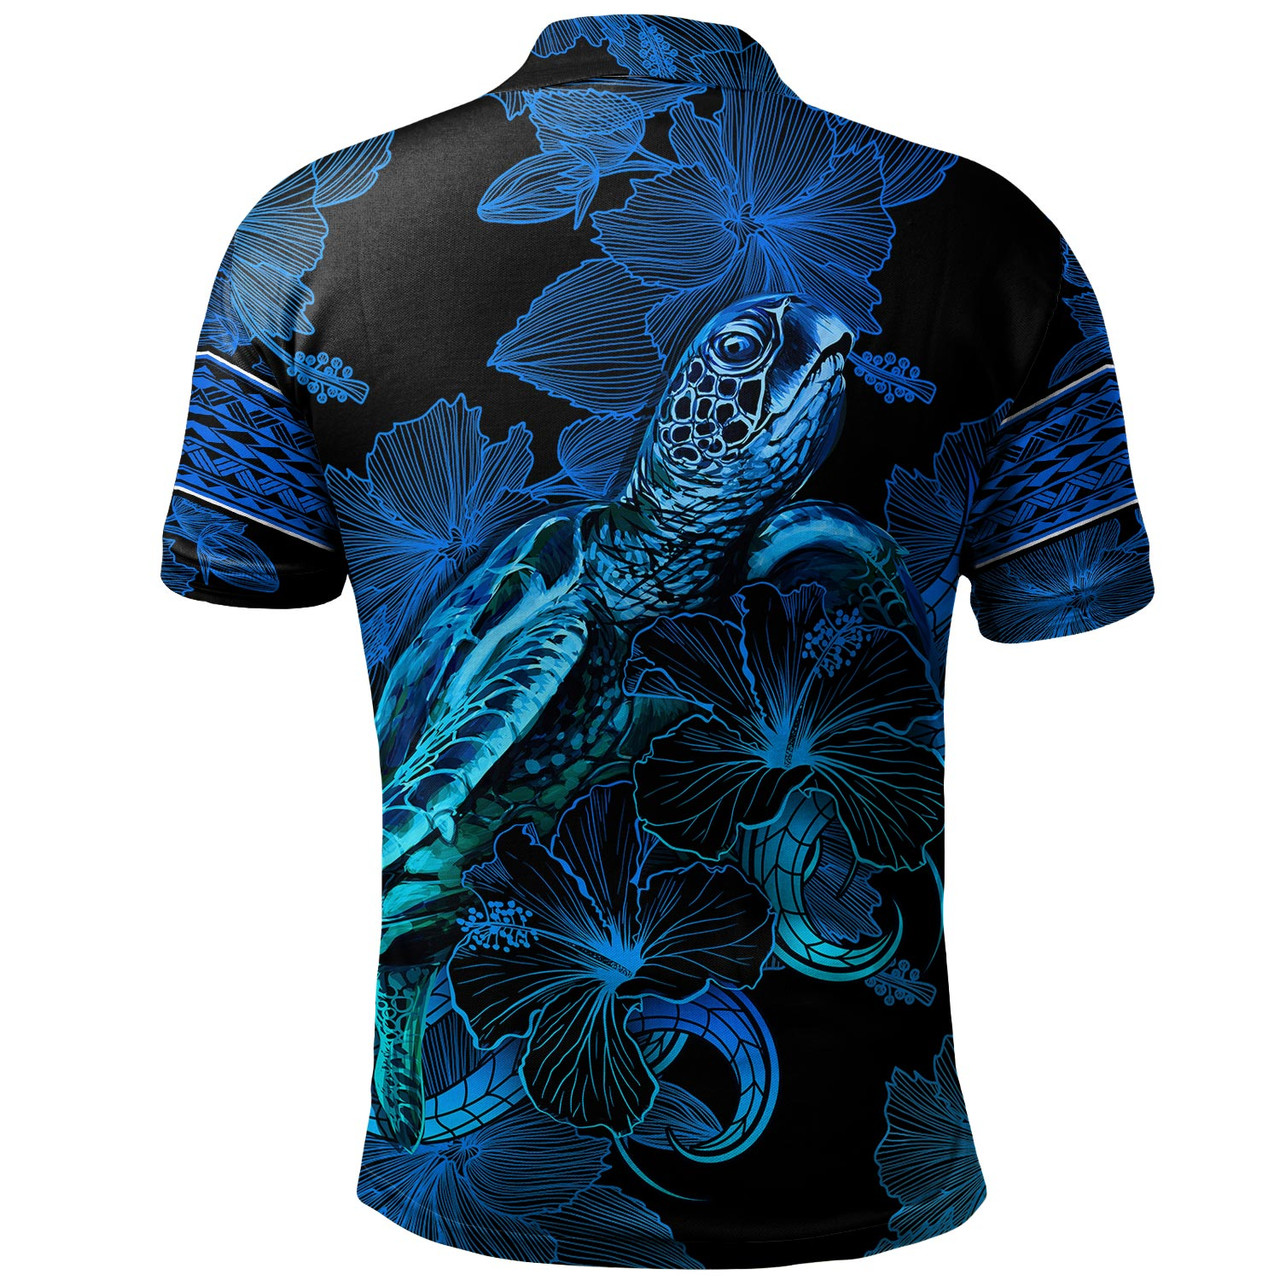 Yap State Polo Shirt Sea Turtle With Blooming Hibiscus Flowers Tribal Blue